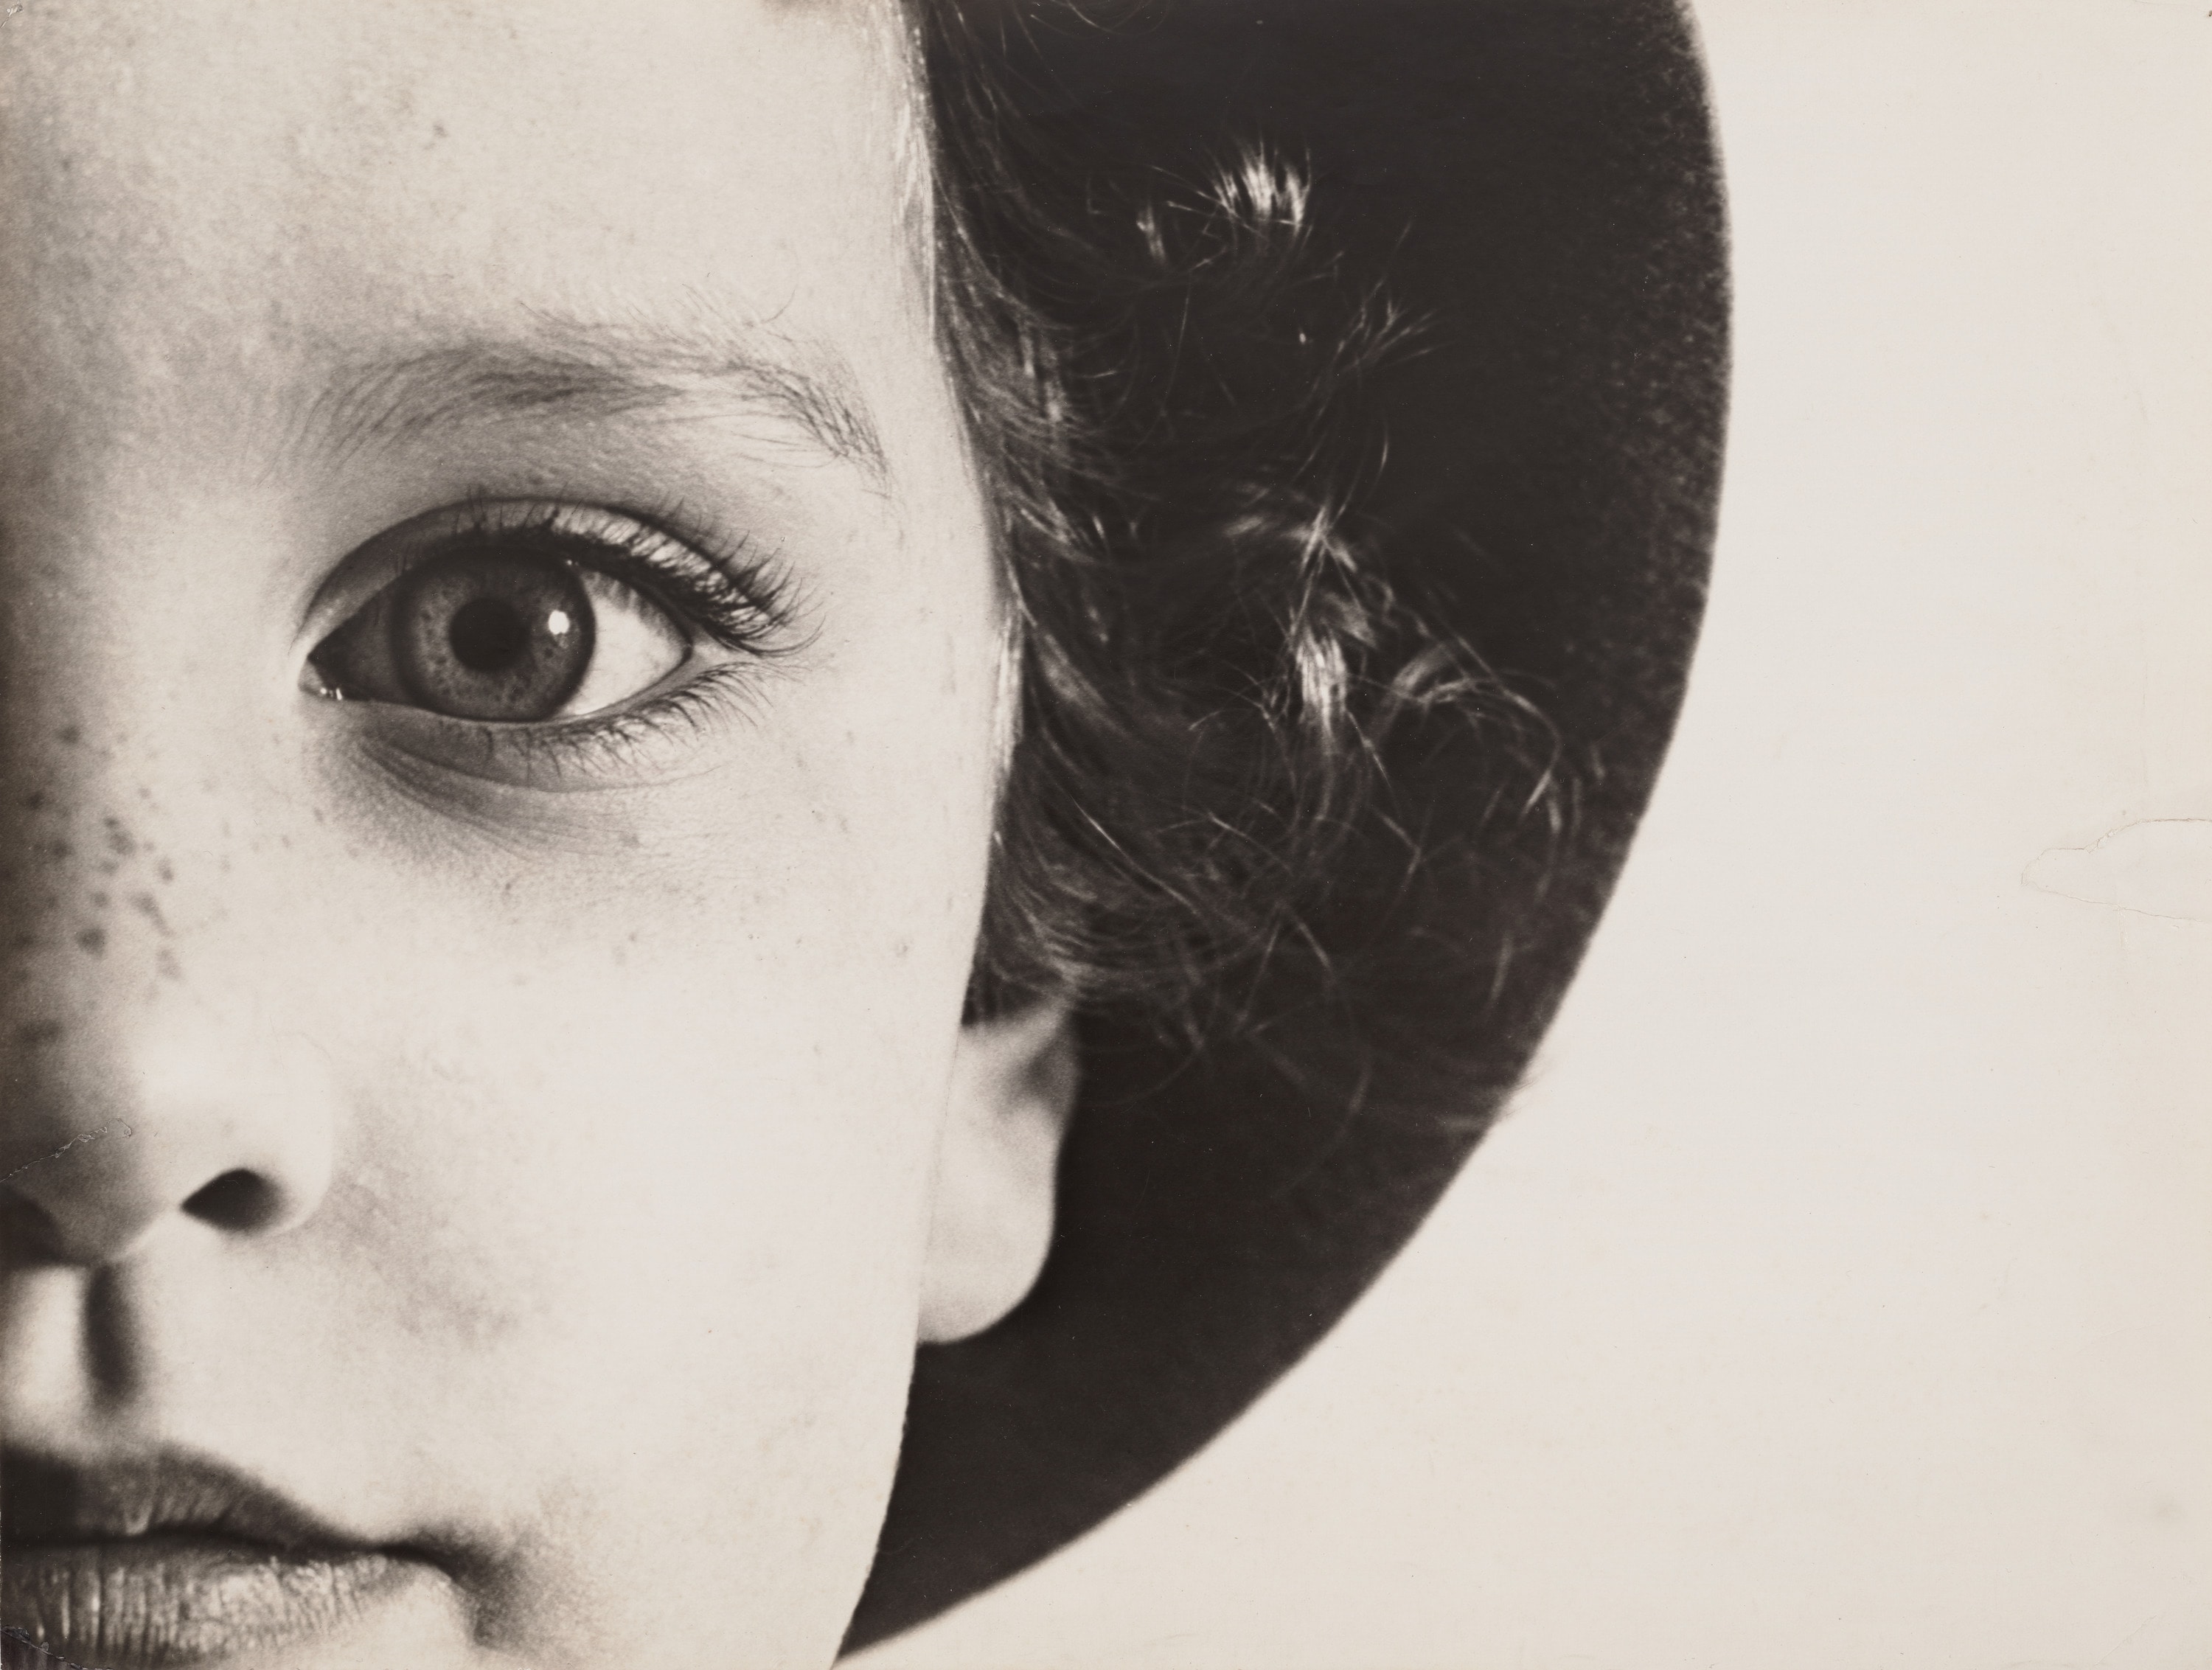 Max Burchartz: Lotte (Eye), 1928. Stampa alla gelatina ai sali d’argento, 30.2 x 40 cm. The Museum of Modern Art, New York Thomas Walther Collection. Acquired through the generosity of Peter Norton © 2021, ProLitteris, Zürich Digital Image © 2021 The Museum of Modern Art, New York/Scala, Florence